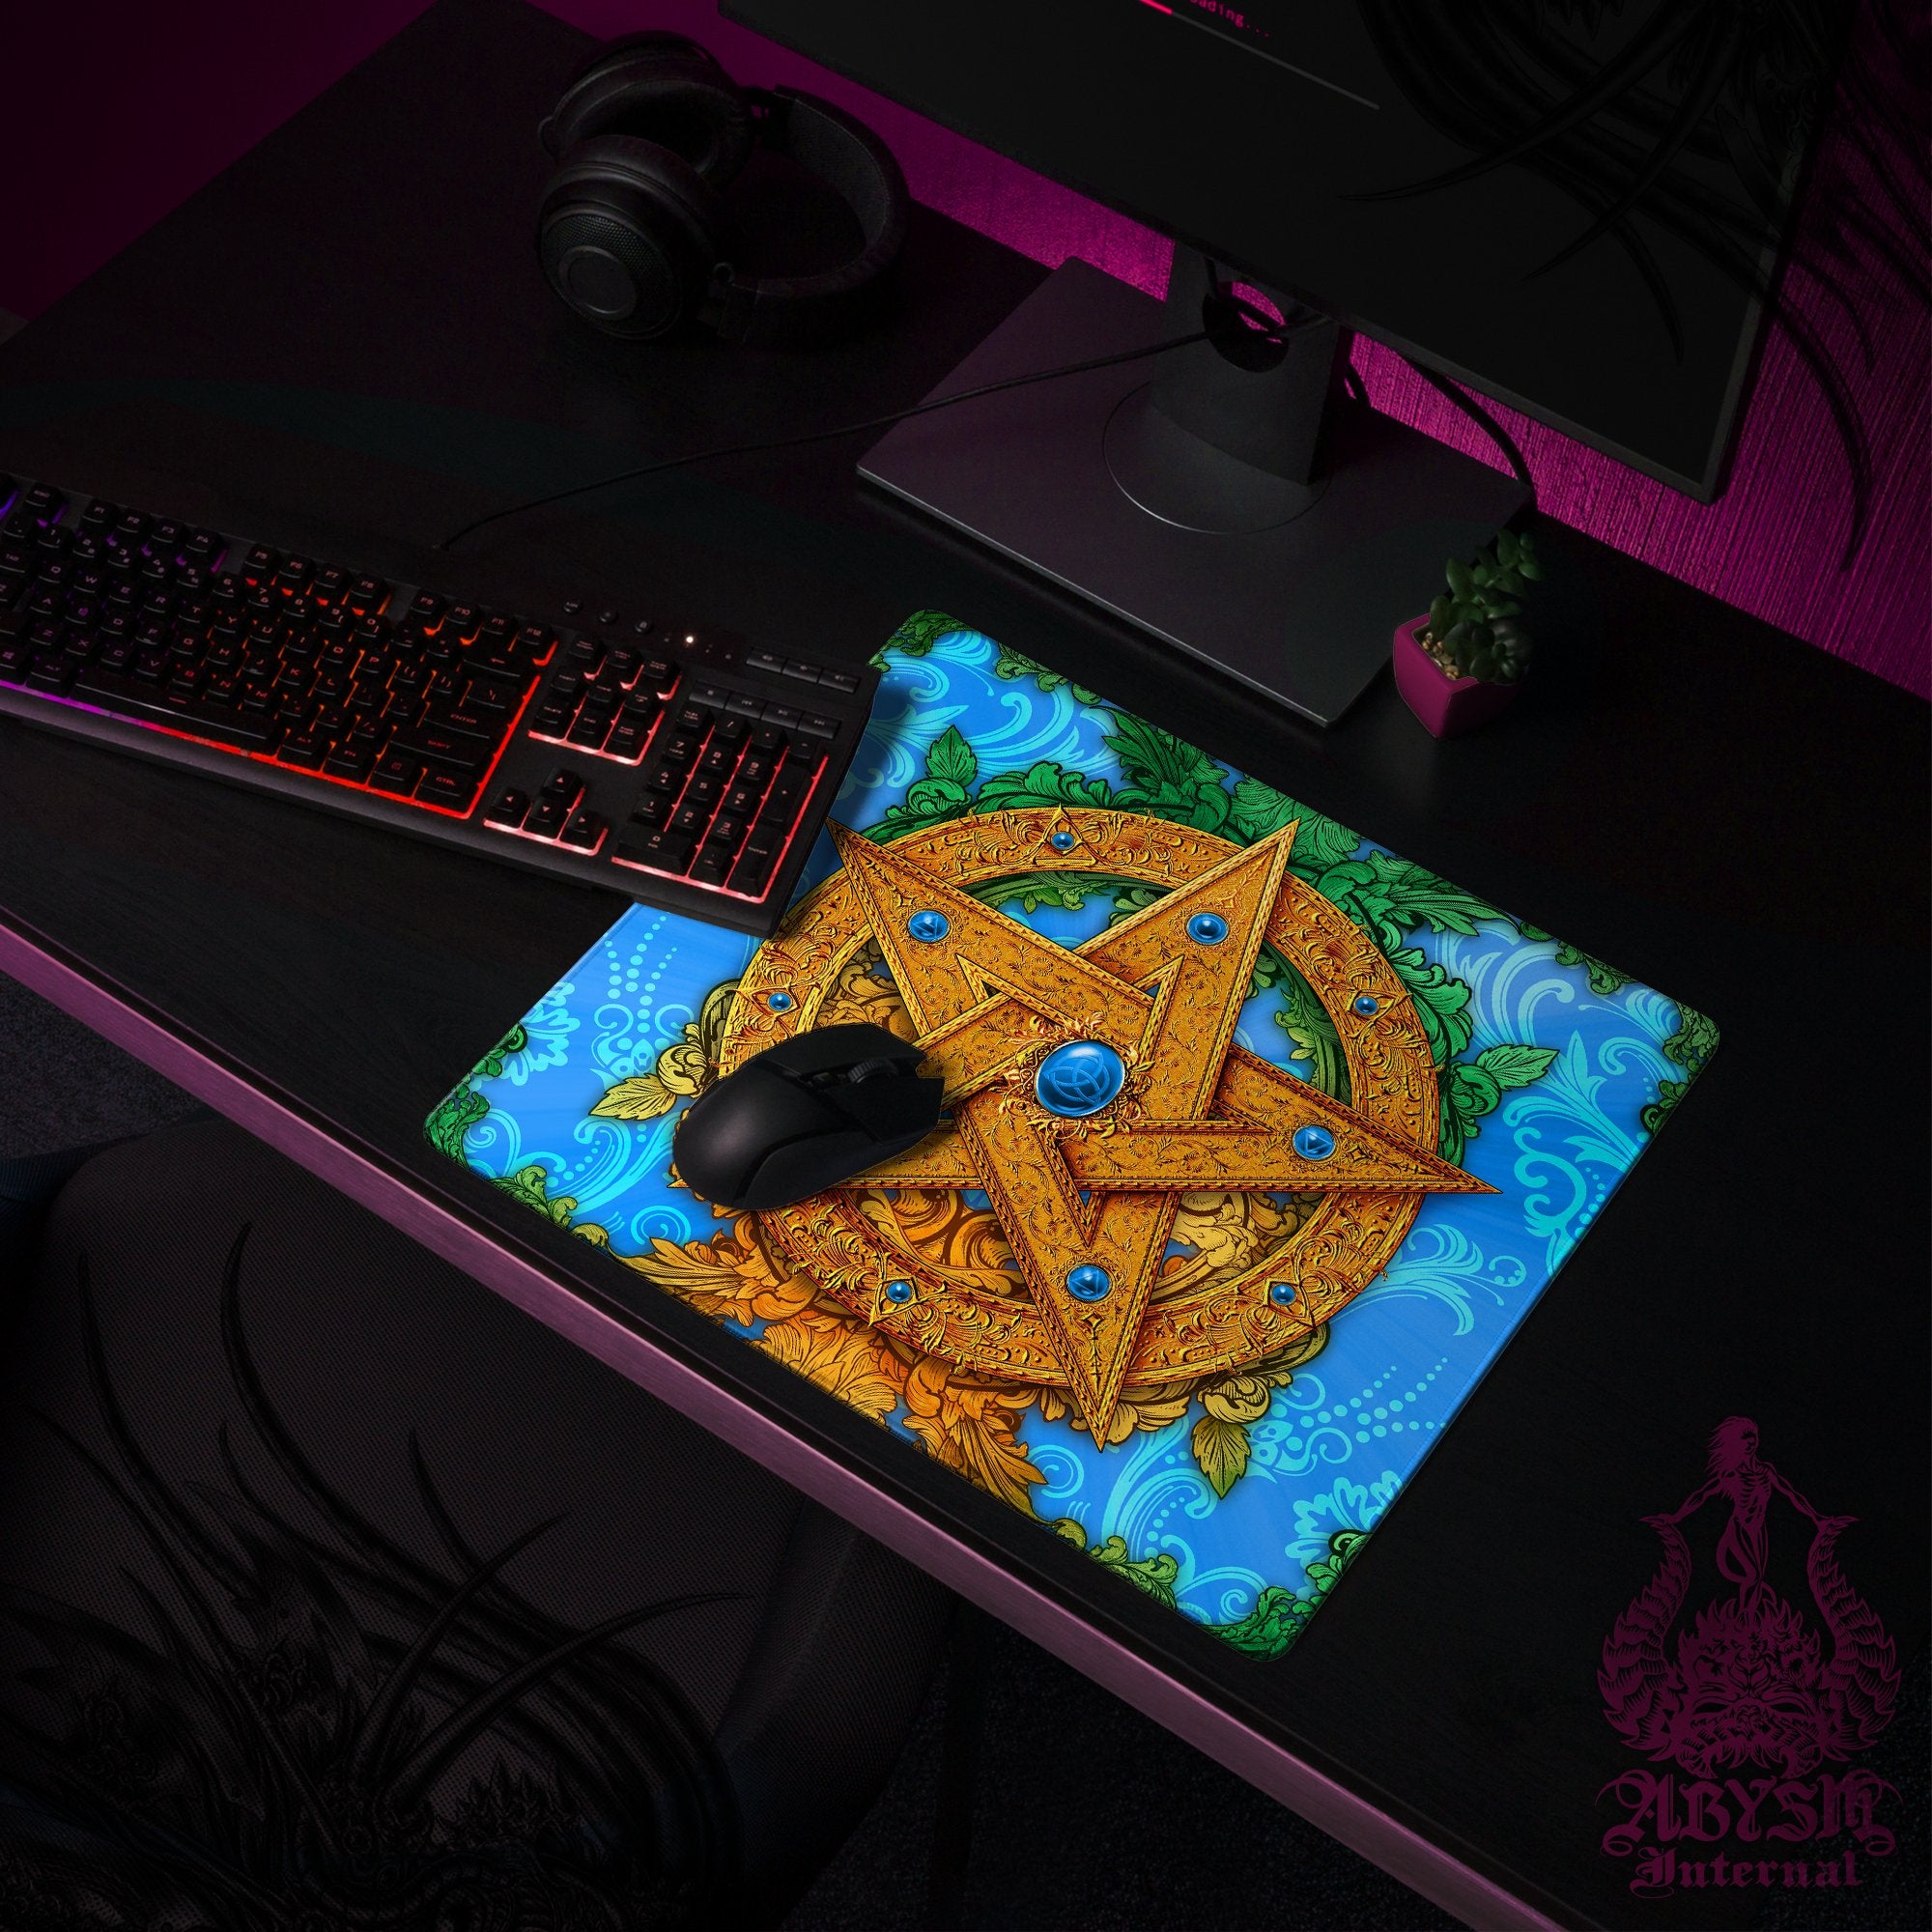 Pentacle Desk Mat, Witch Gaming Mouse Pad, Witchy Table Protector Cover, Wicca Workpad, Fantasy Art Print - 5 Colors - Abysm Internal